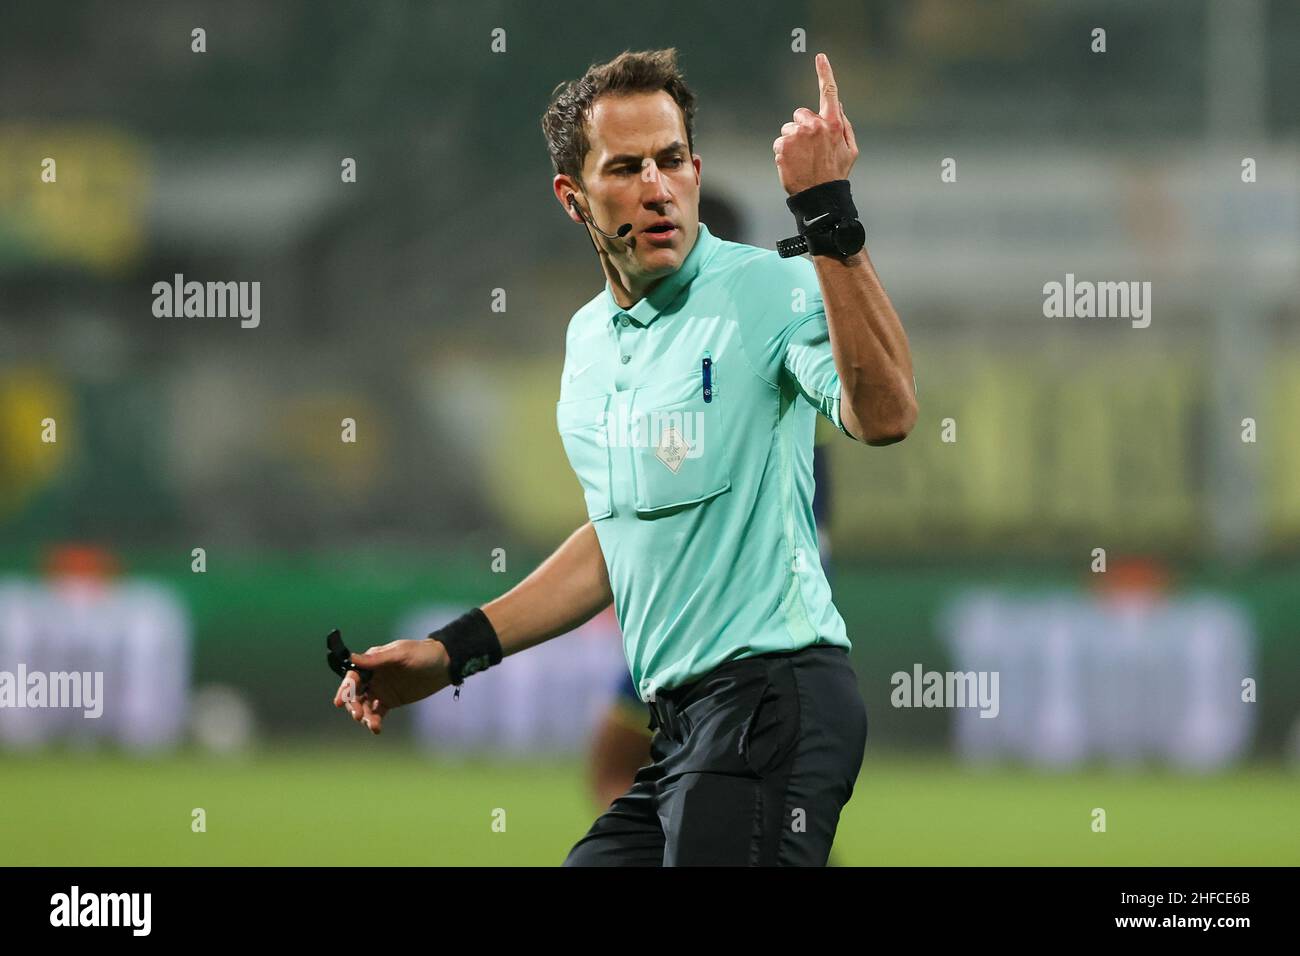 DEN HAAG, NETHERLANDS - JANUARY 15: Referee Martin Perez during the Dutch  Keukenkampioendivisie match between ADO Den Haag and TOP Oss at Cars Jeans  Stadion on January 15, 2022 in Den Haag,